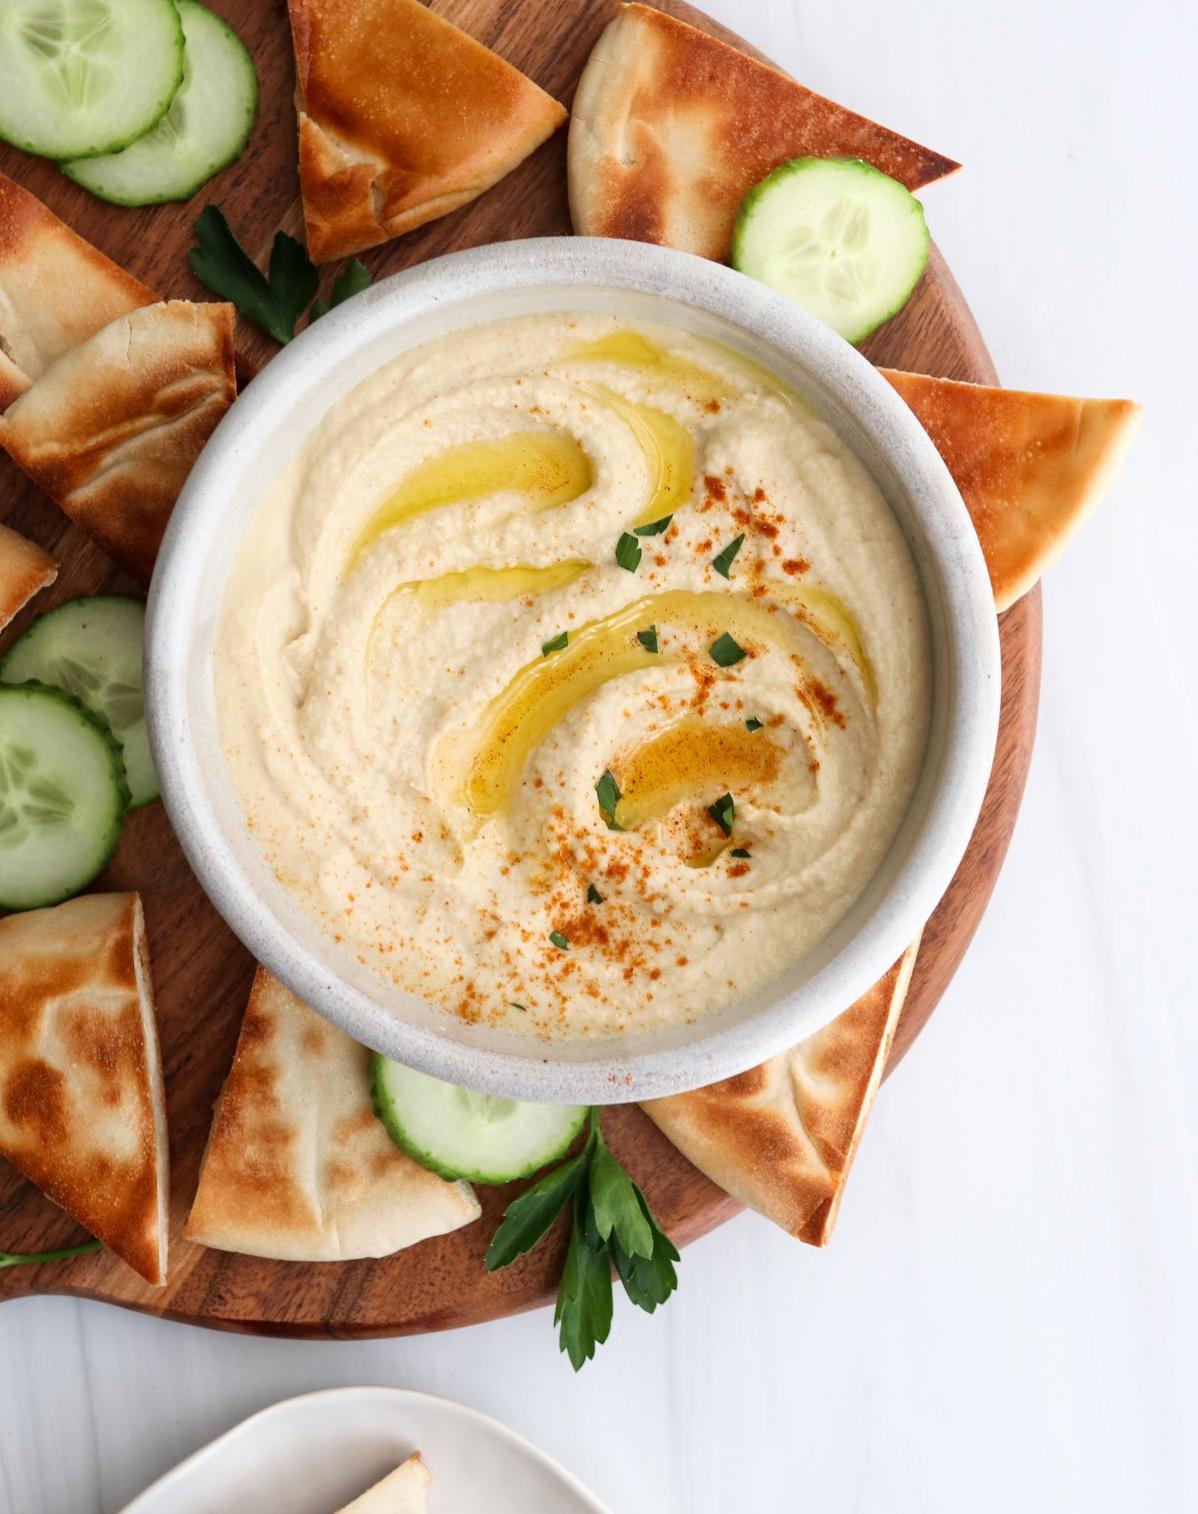  This hummus is loaded with parsley and coriander, which not only adds flavor but also detox